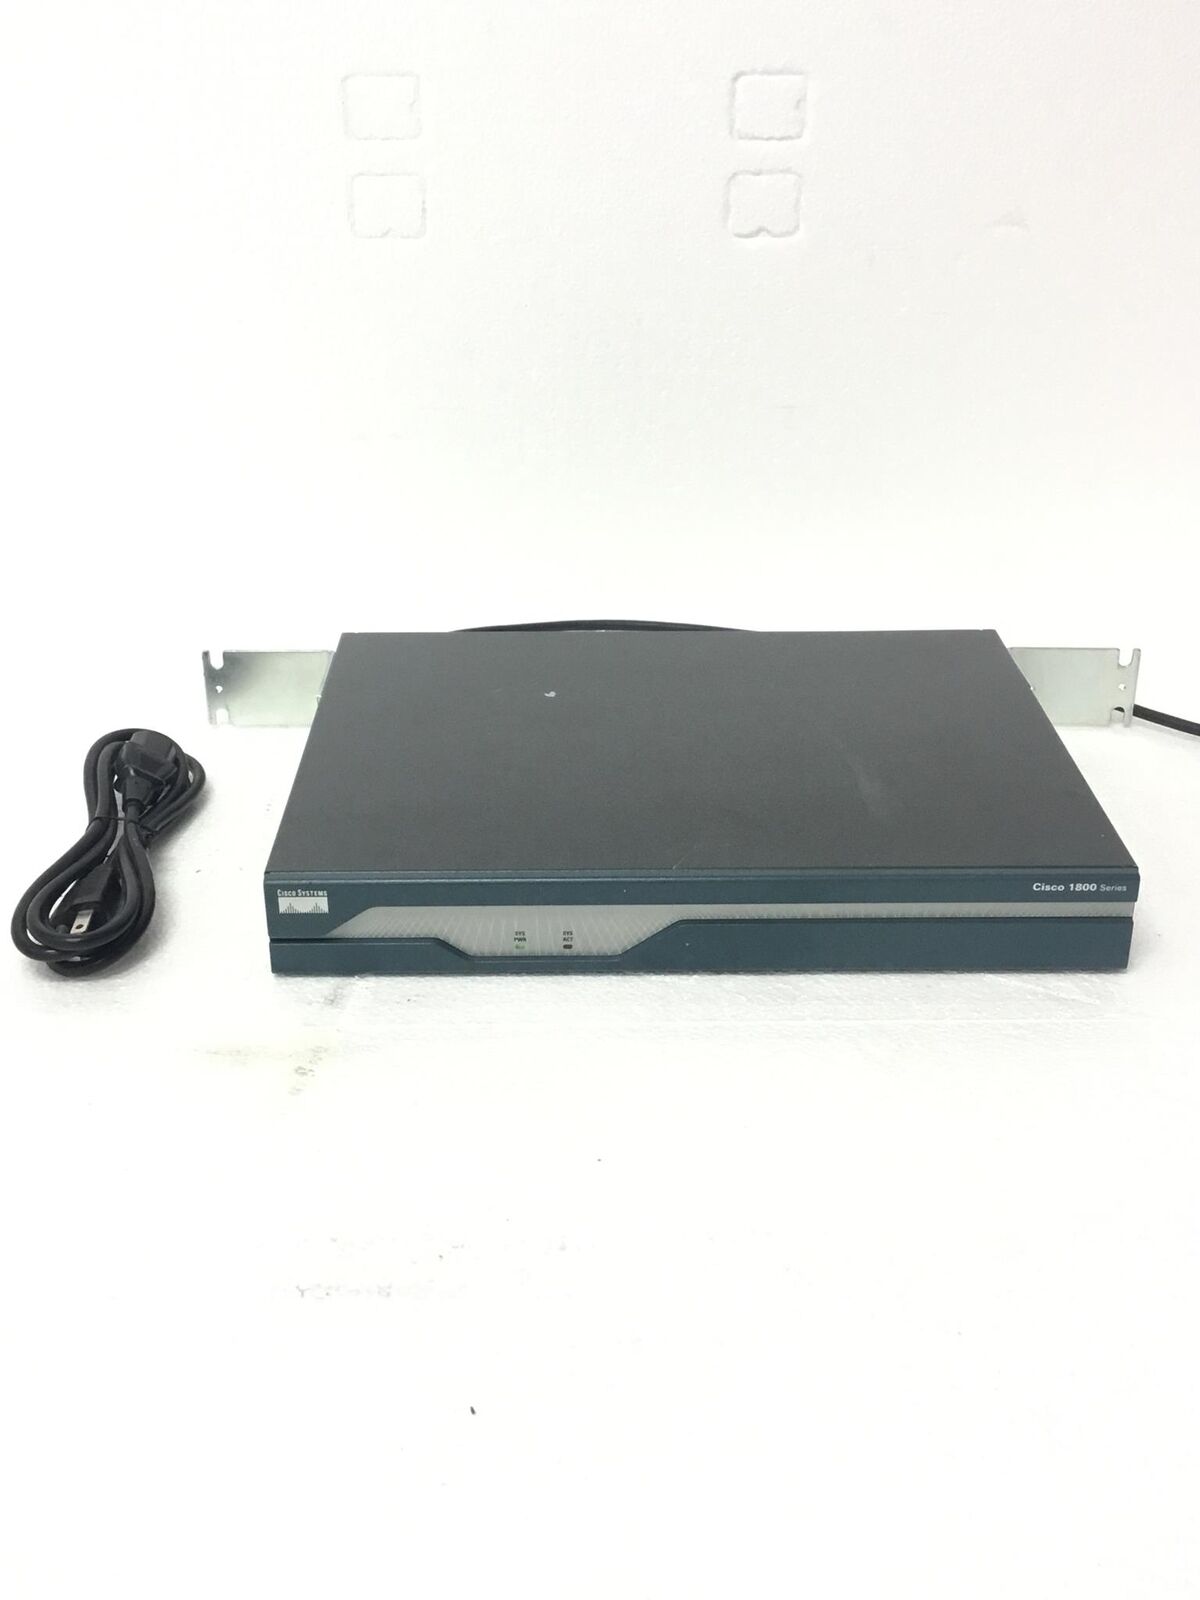 CISCO 1800 1840 Integrated Services Router w/Wic-2T Card,64MB Flash,Rack Ears